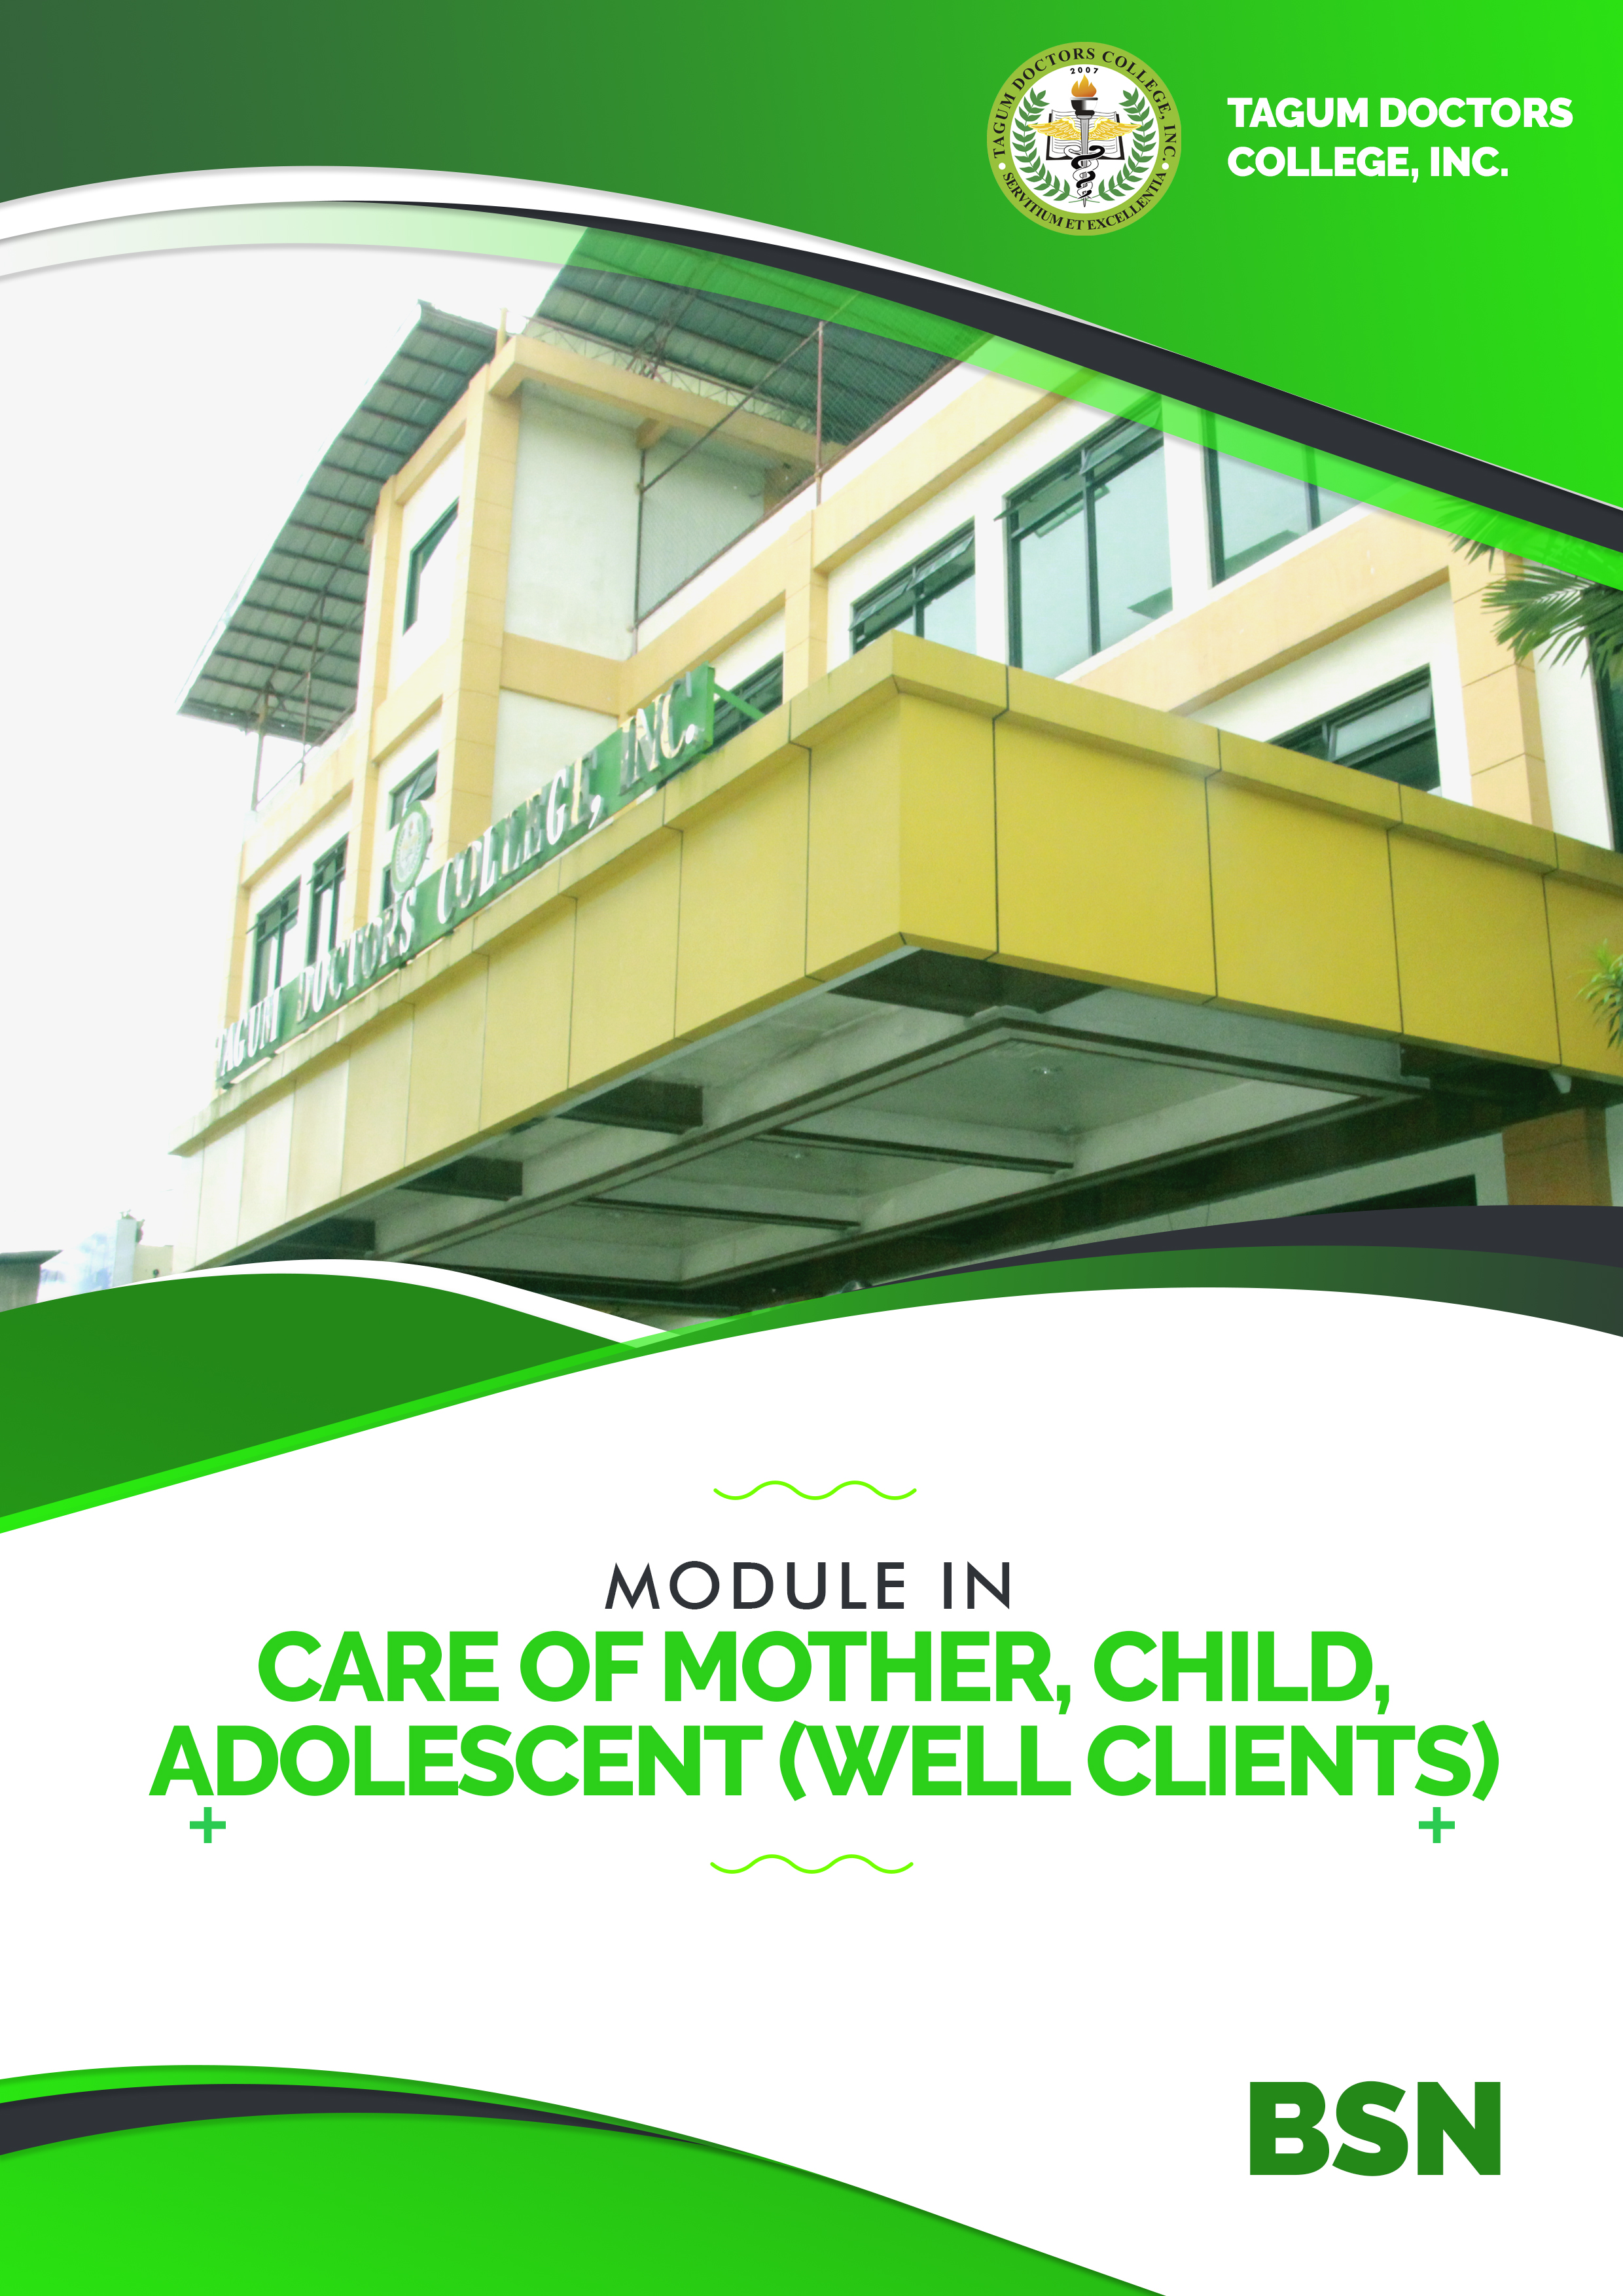 Care of Mother, Child, Adolescent (Well Clients) - BSN 2D